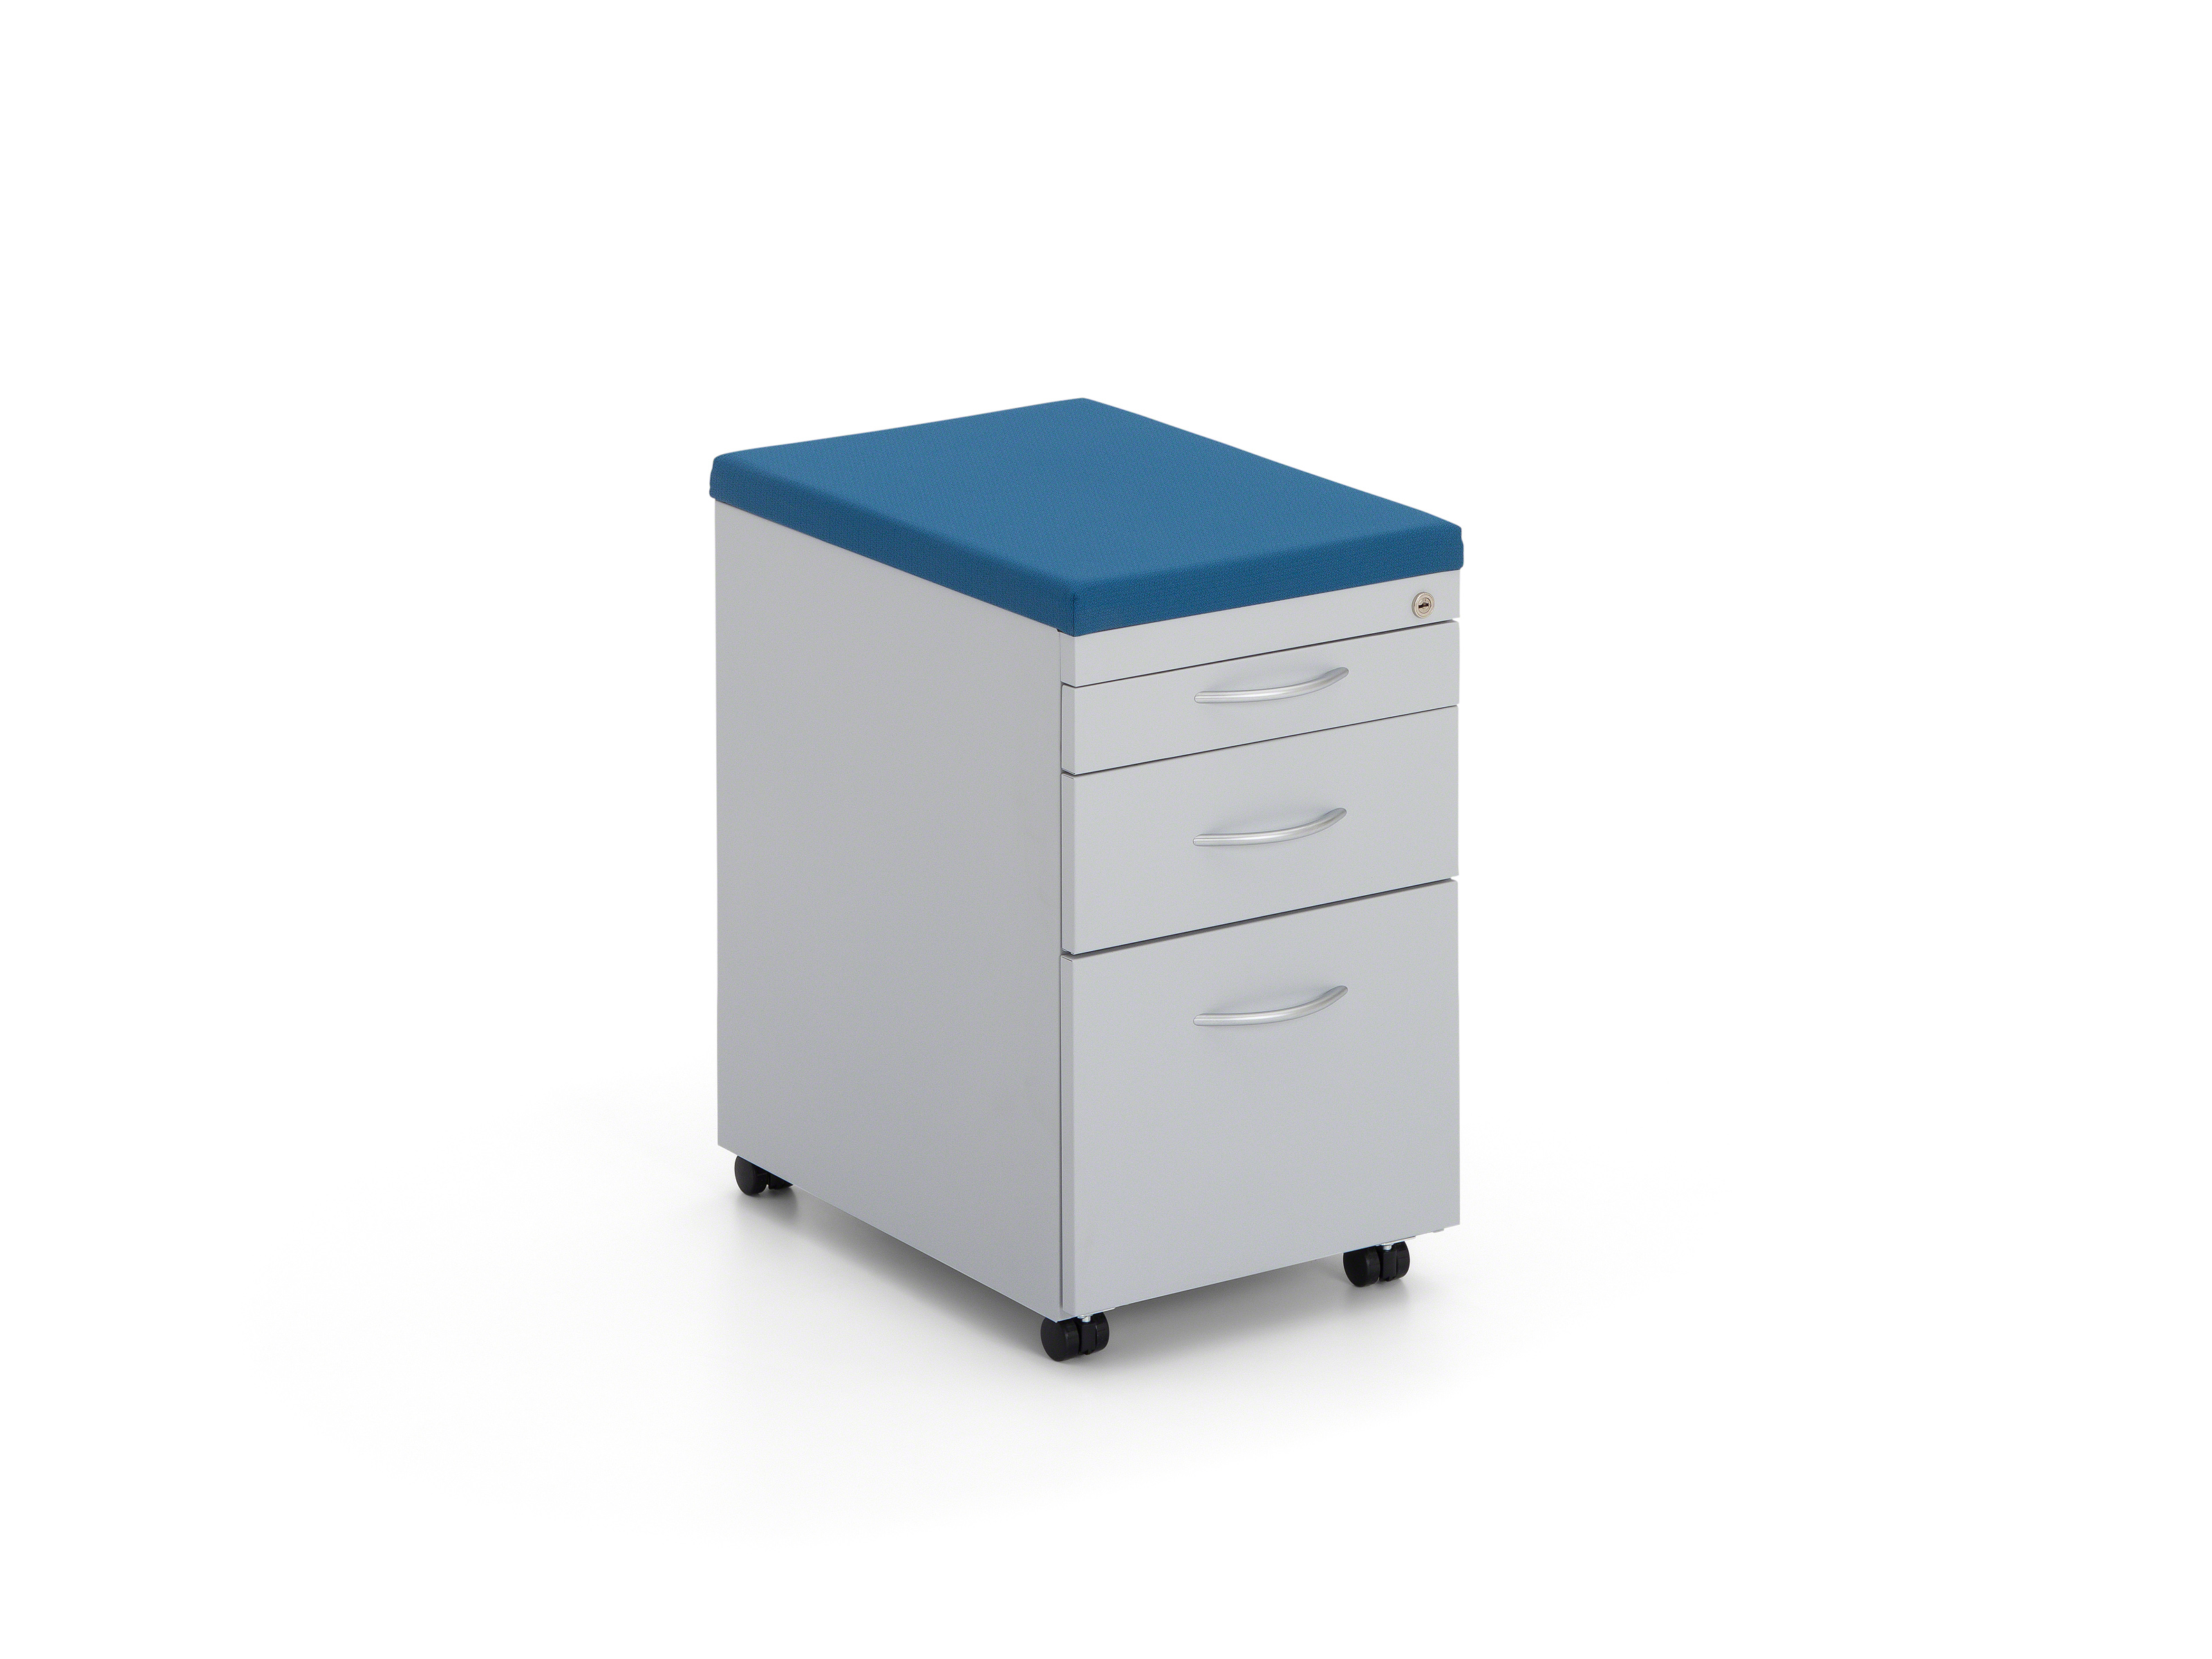 Ts Series Lateral File Cabinets Storage Steelcase pertaining to size 3200 X 2400